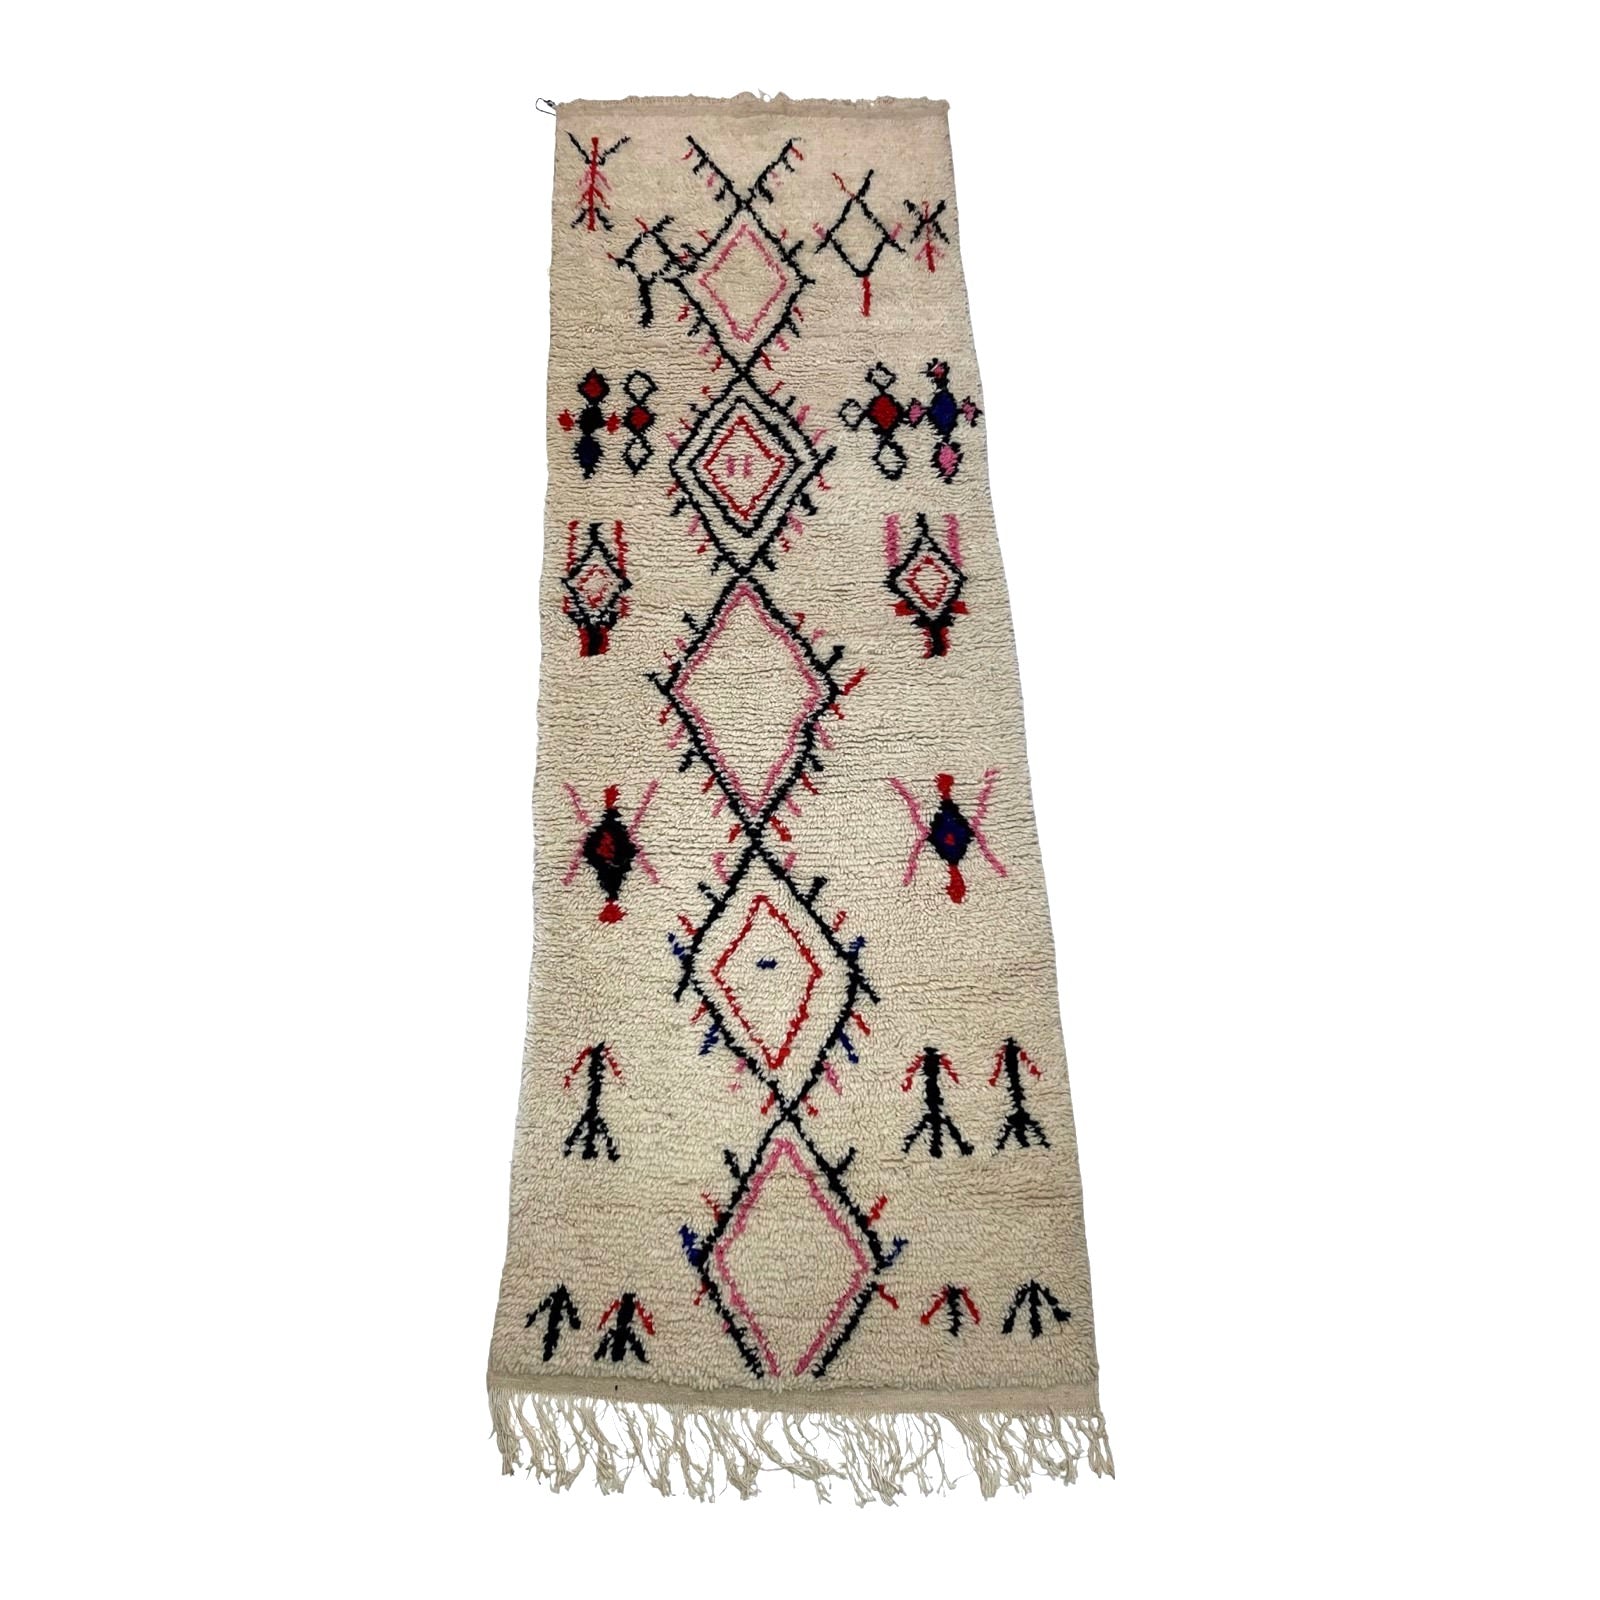 White Azilal style Moroccan runner with pink details - Kantara | Moroccan Rugs